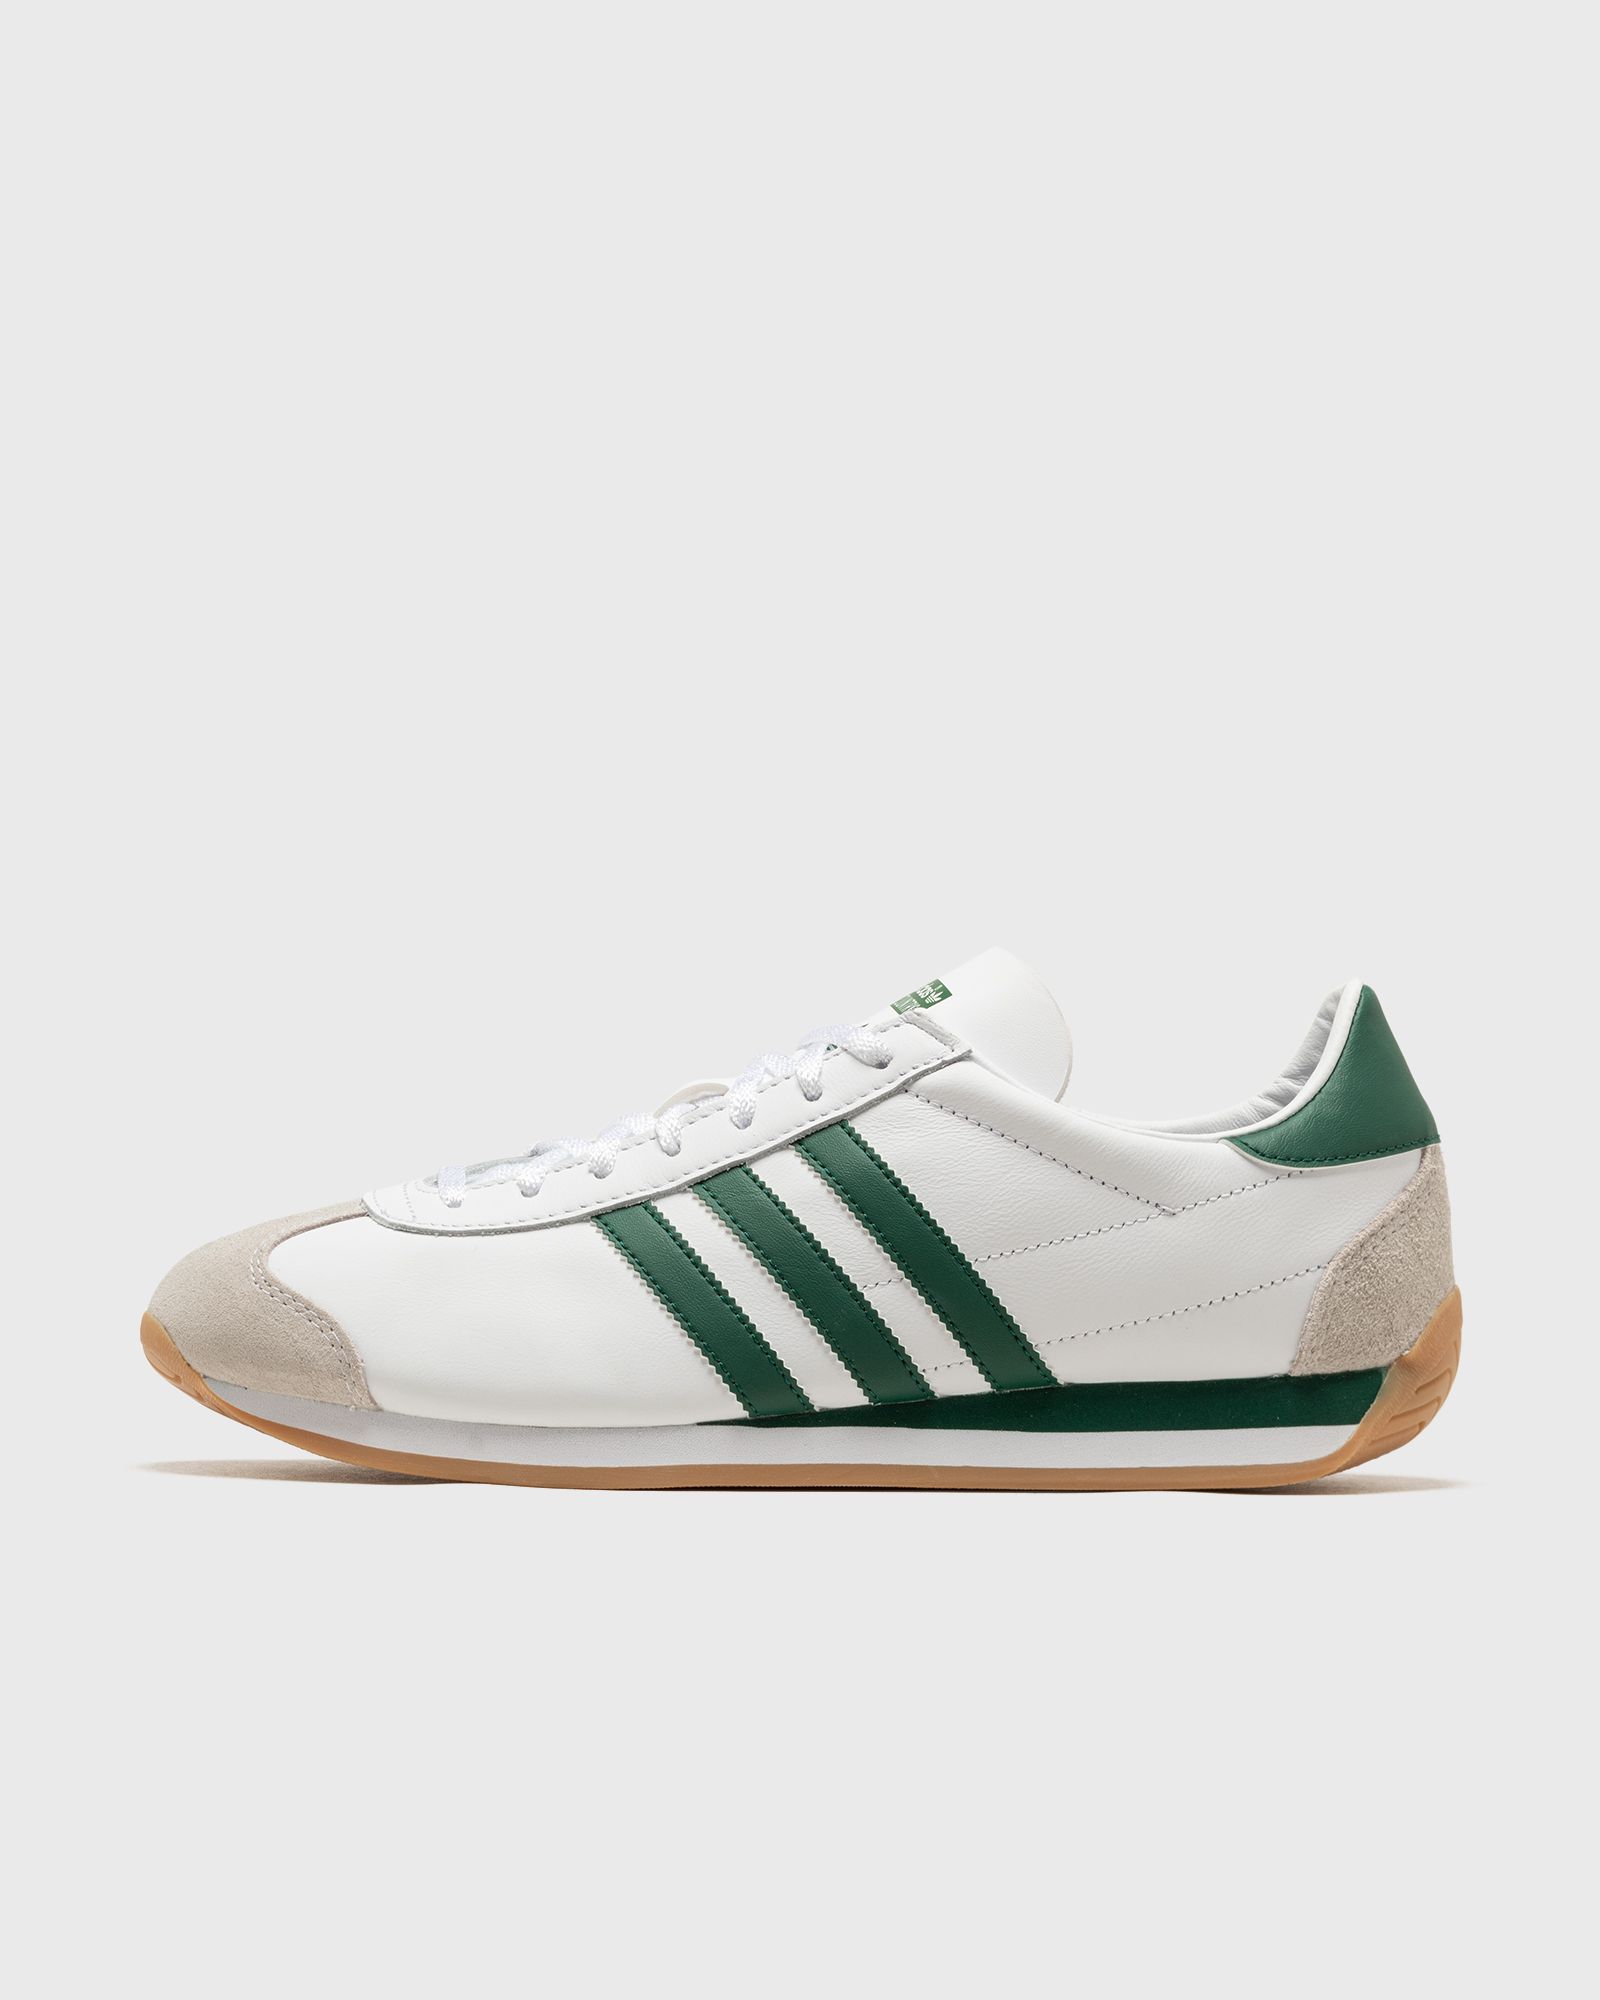 Adidas - country og men lowtop white in größe:37 1/3